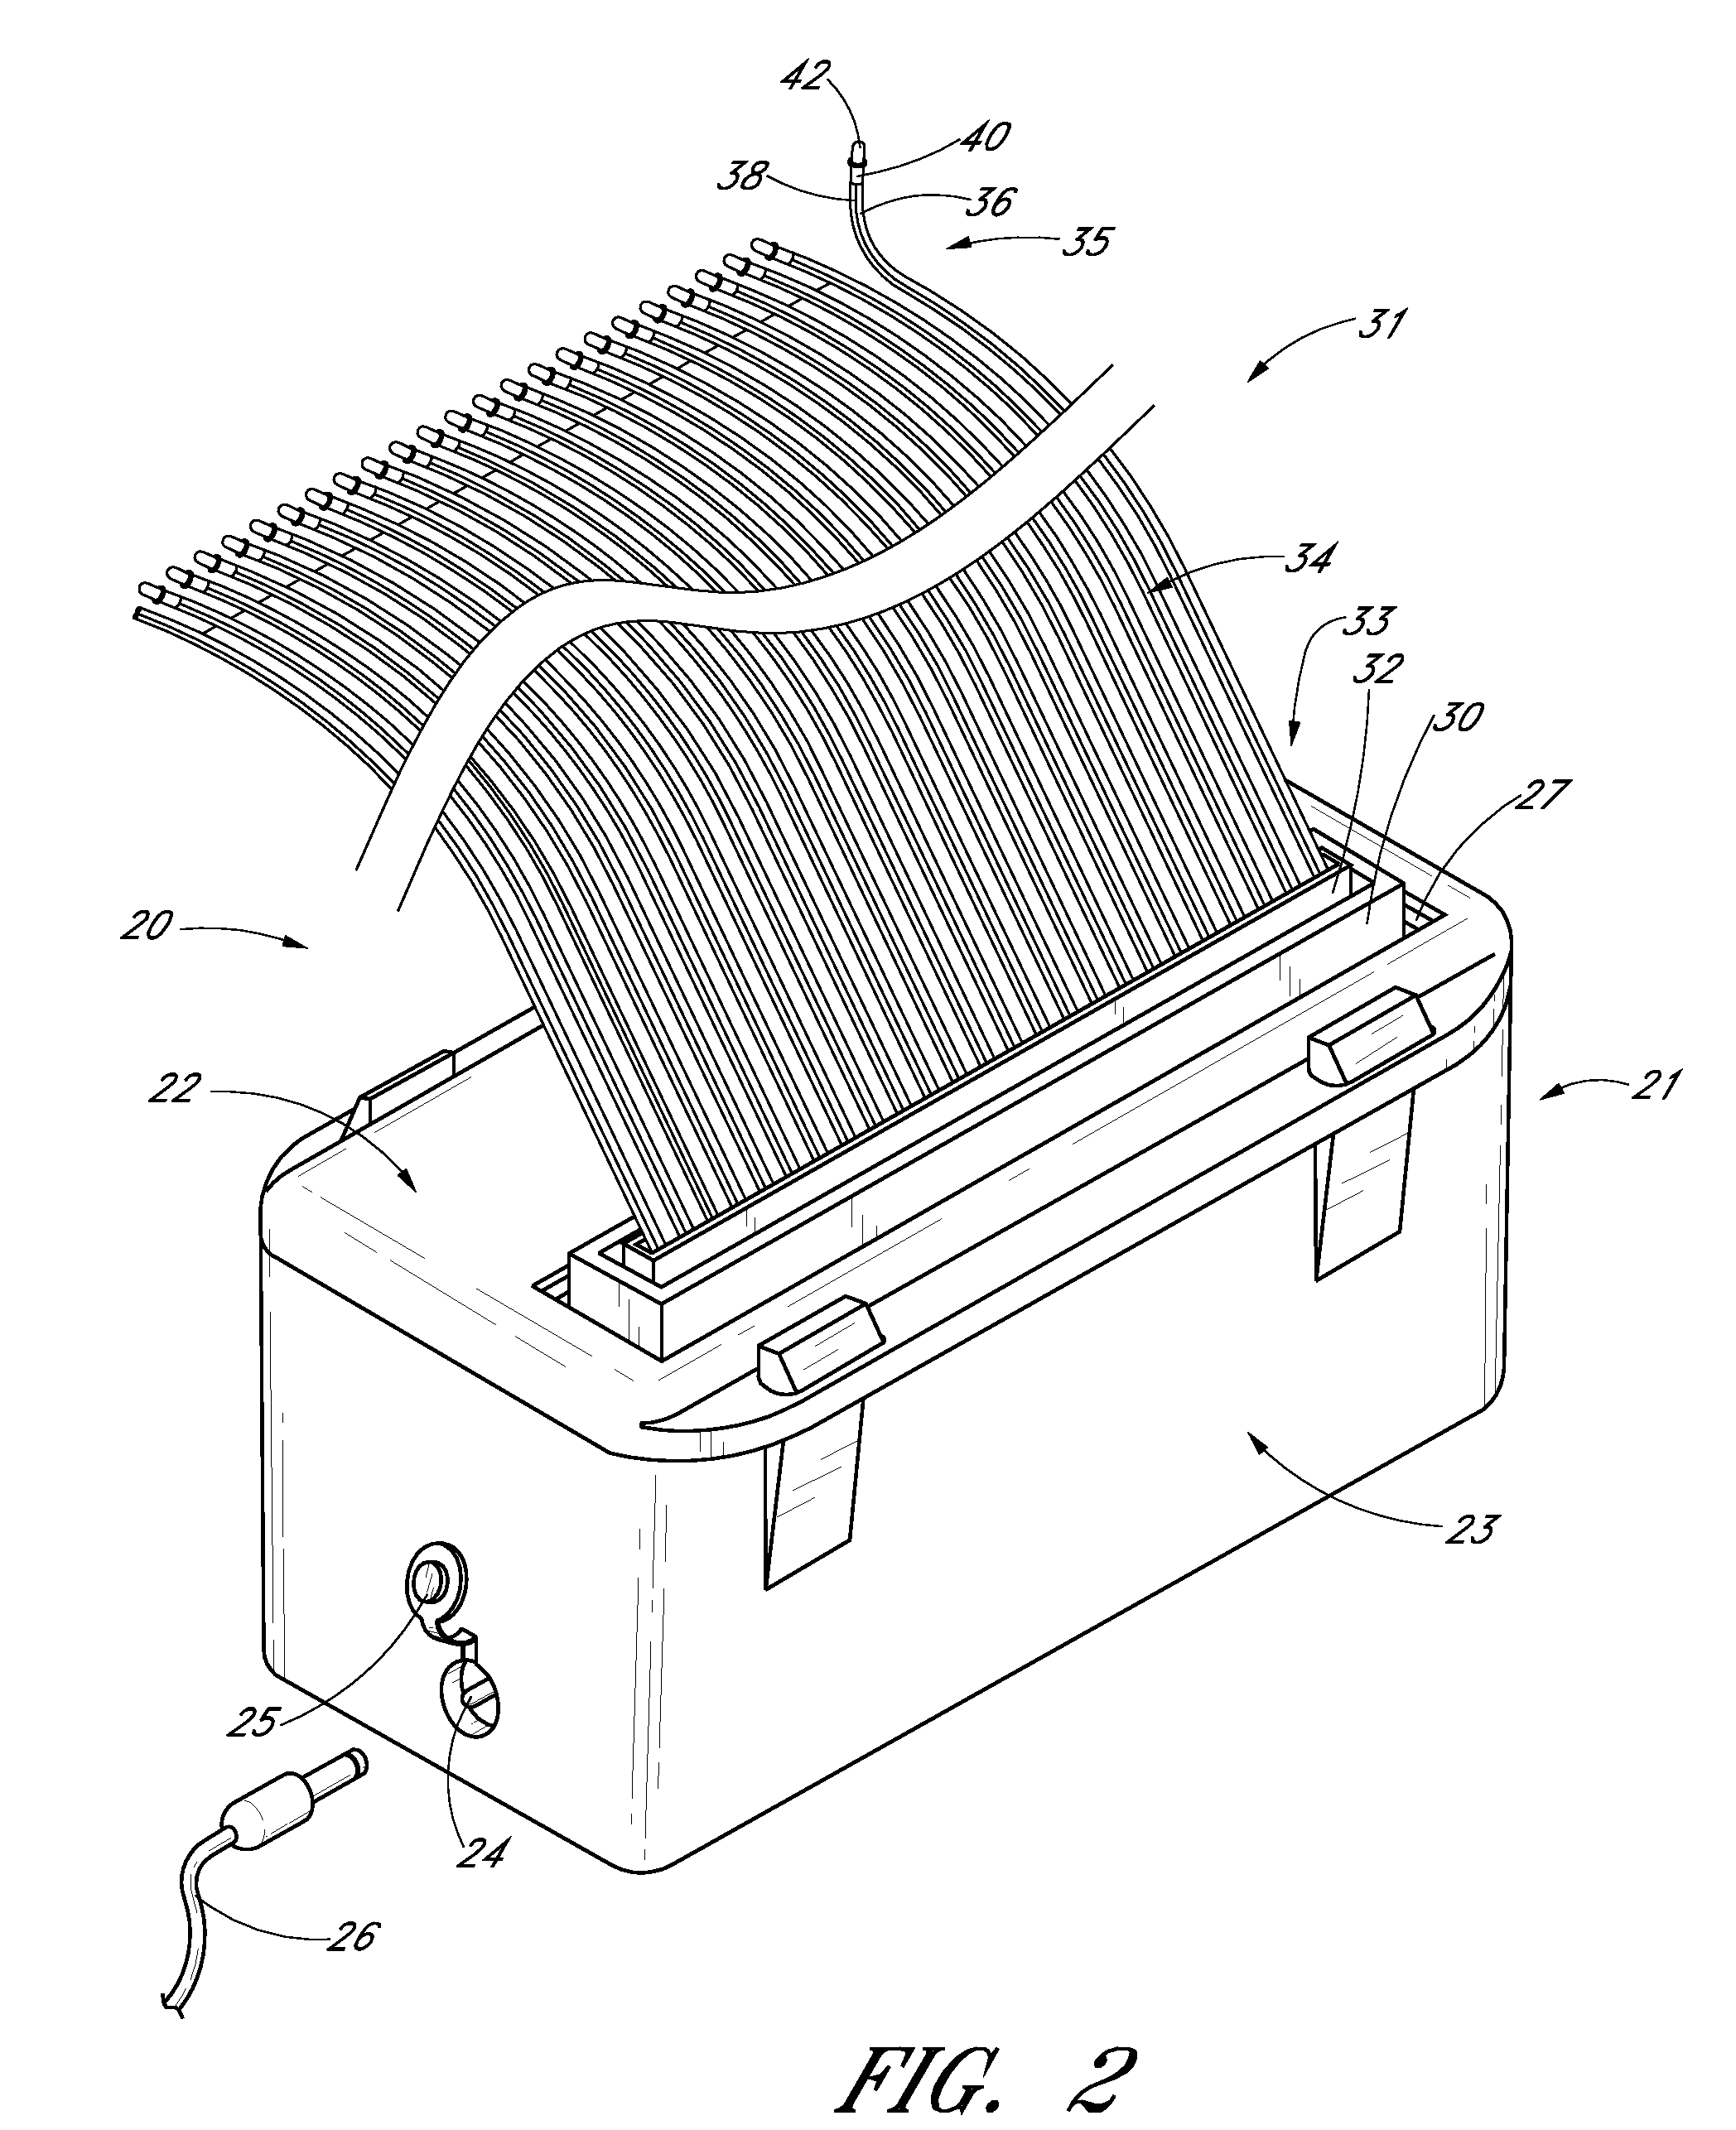 Systems and methods for ornamental variable intensity lighting displays